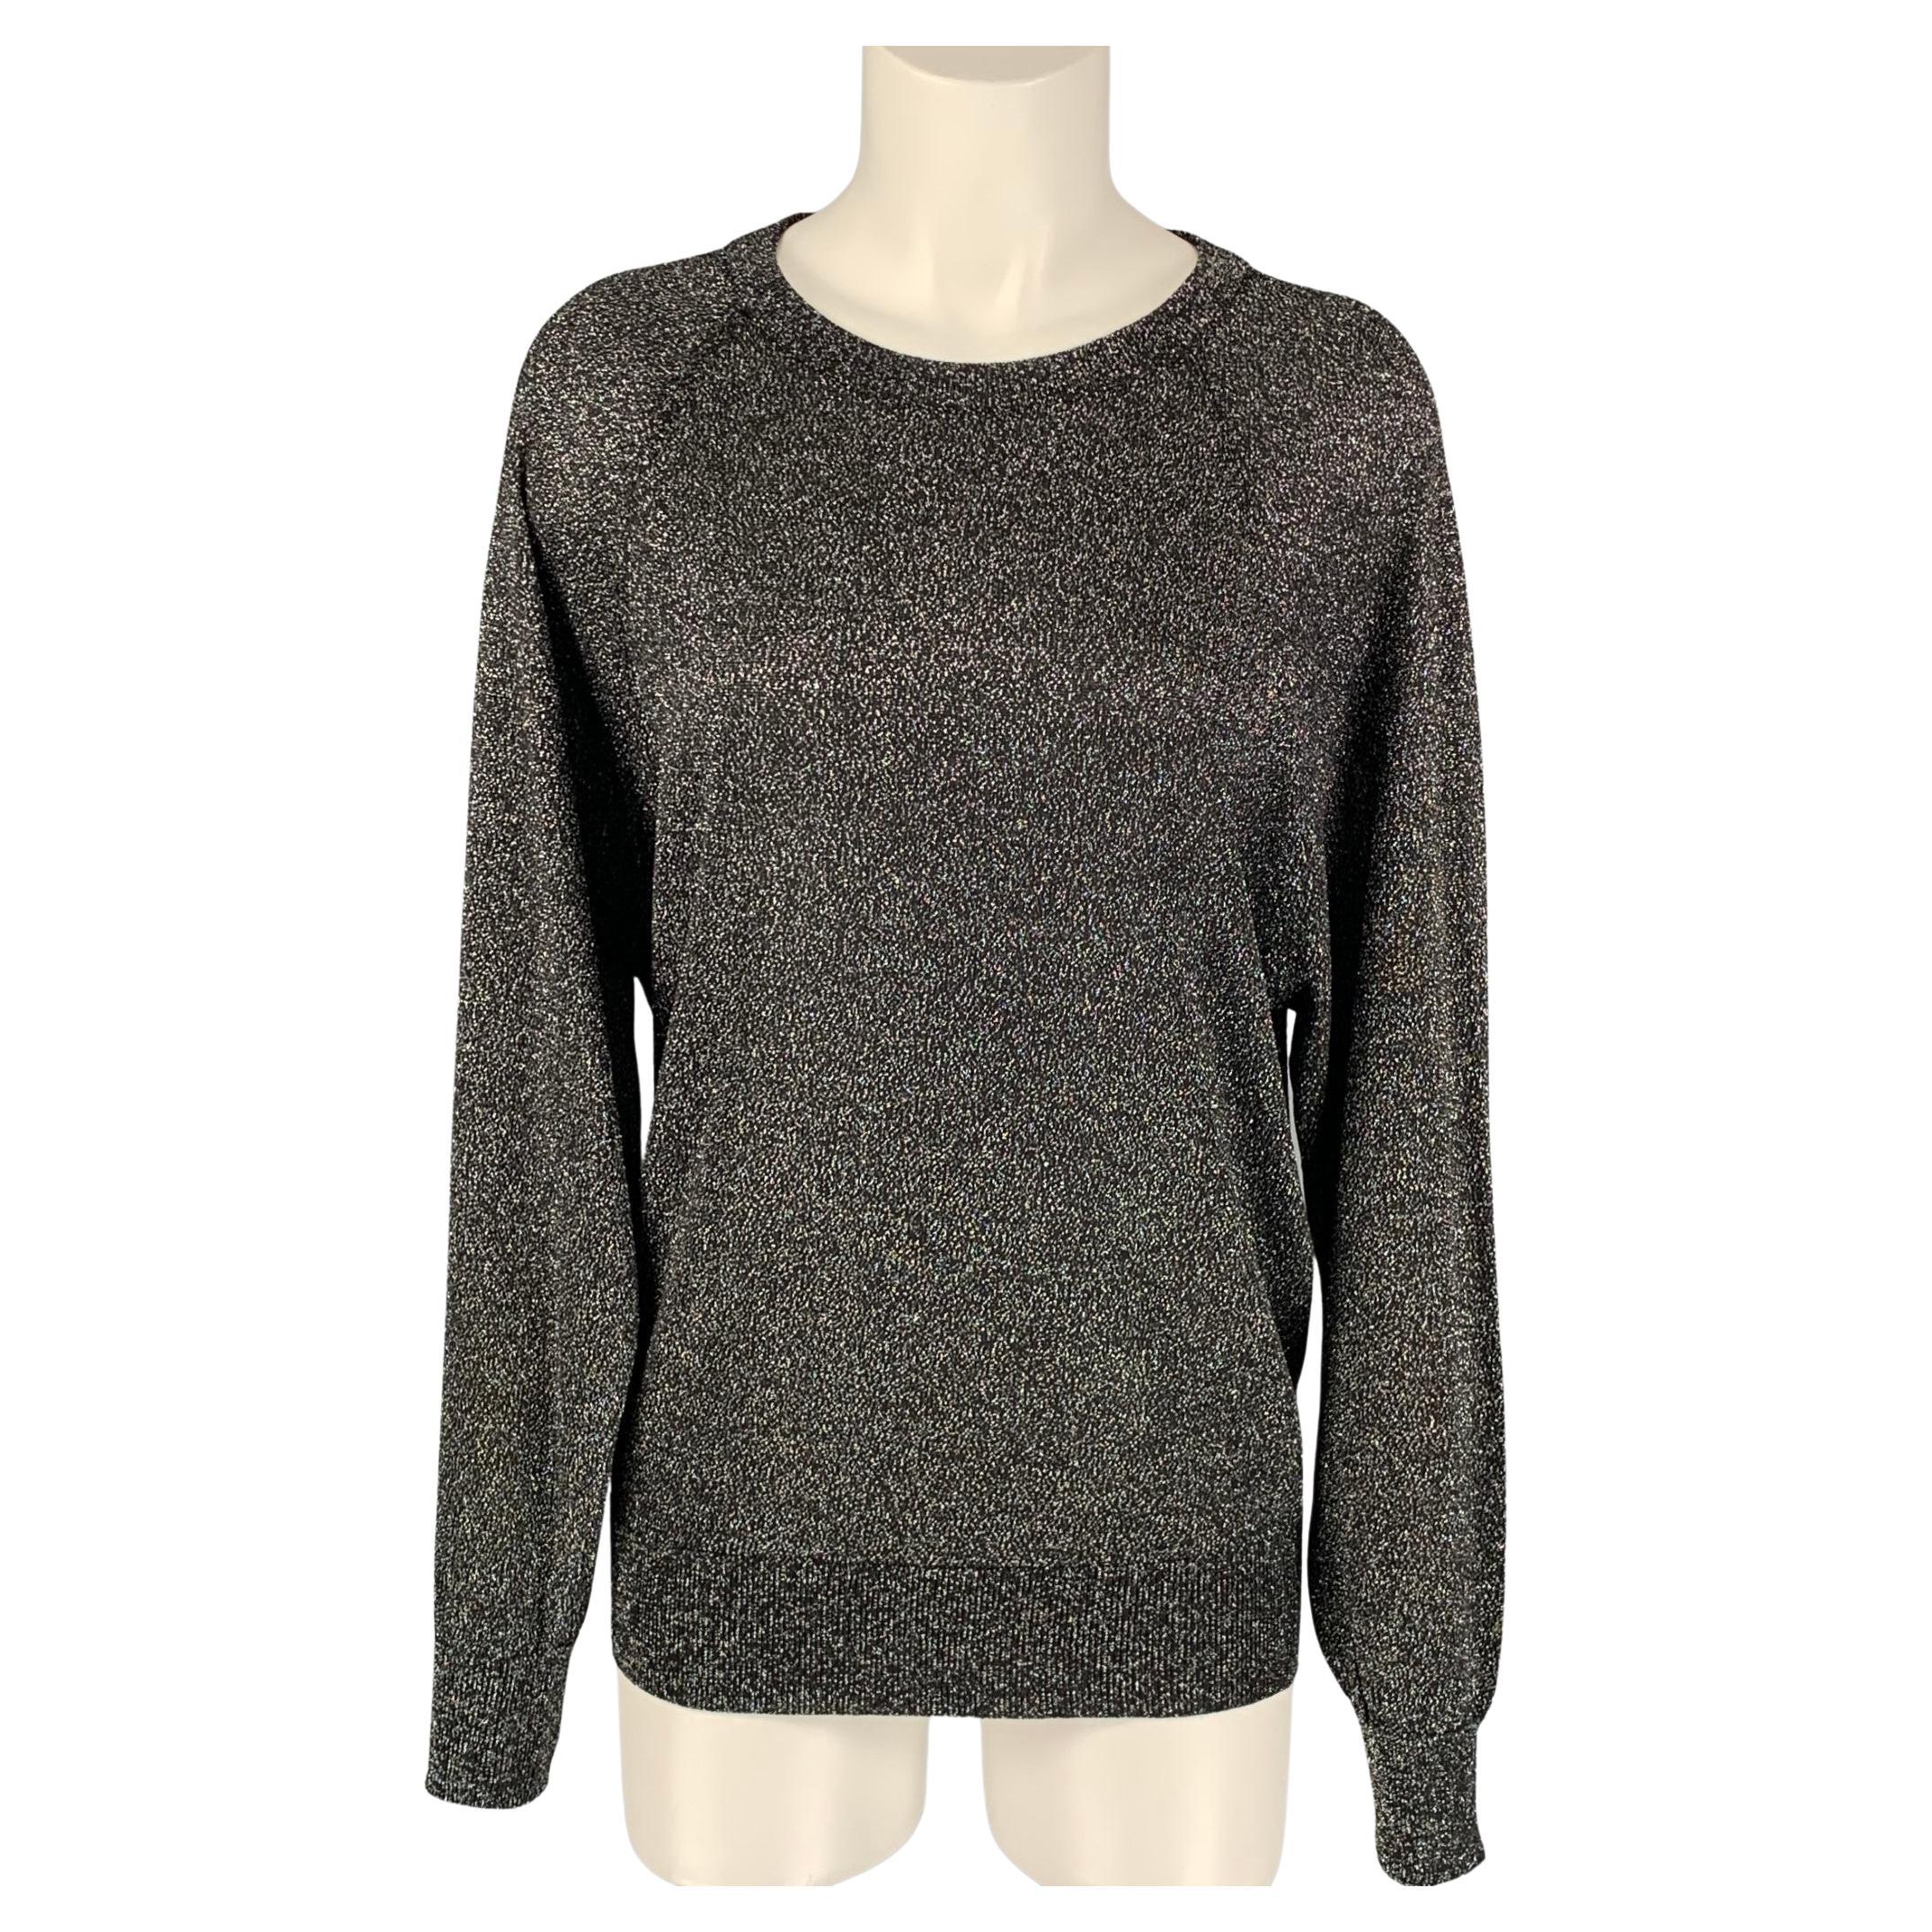 MICHAEL KORS COLLECTION Size XS Black & Silver Metallic Acetate Blend Pullover